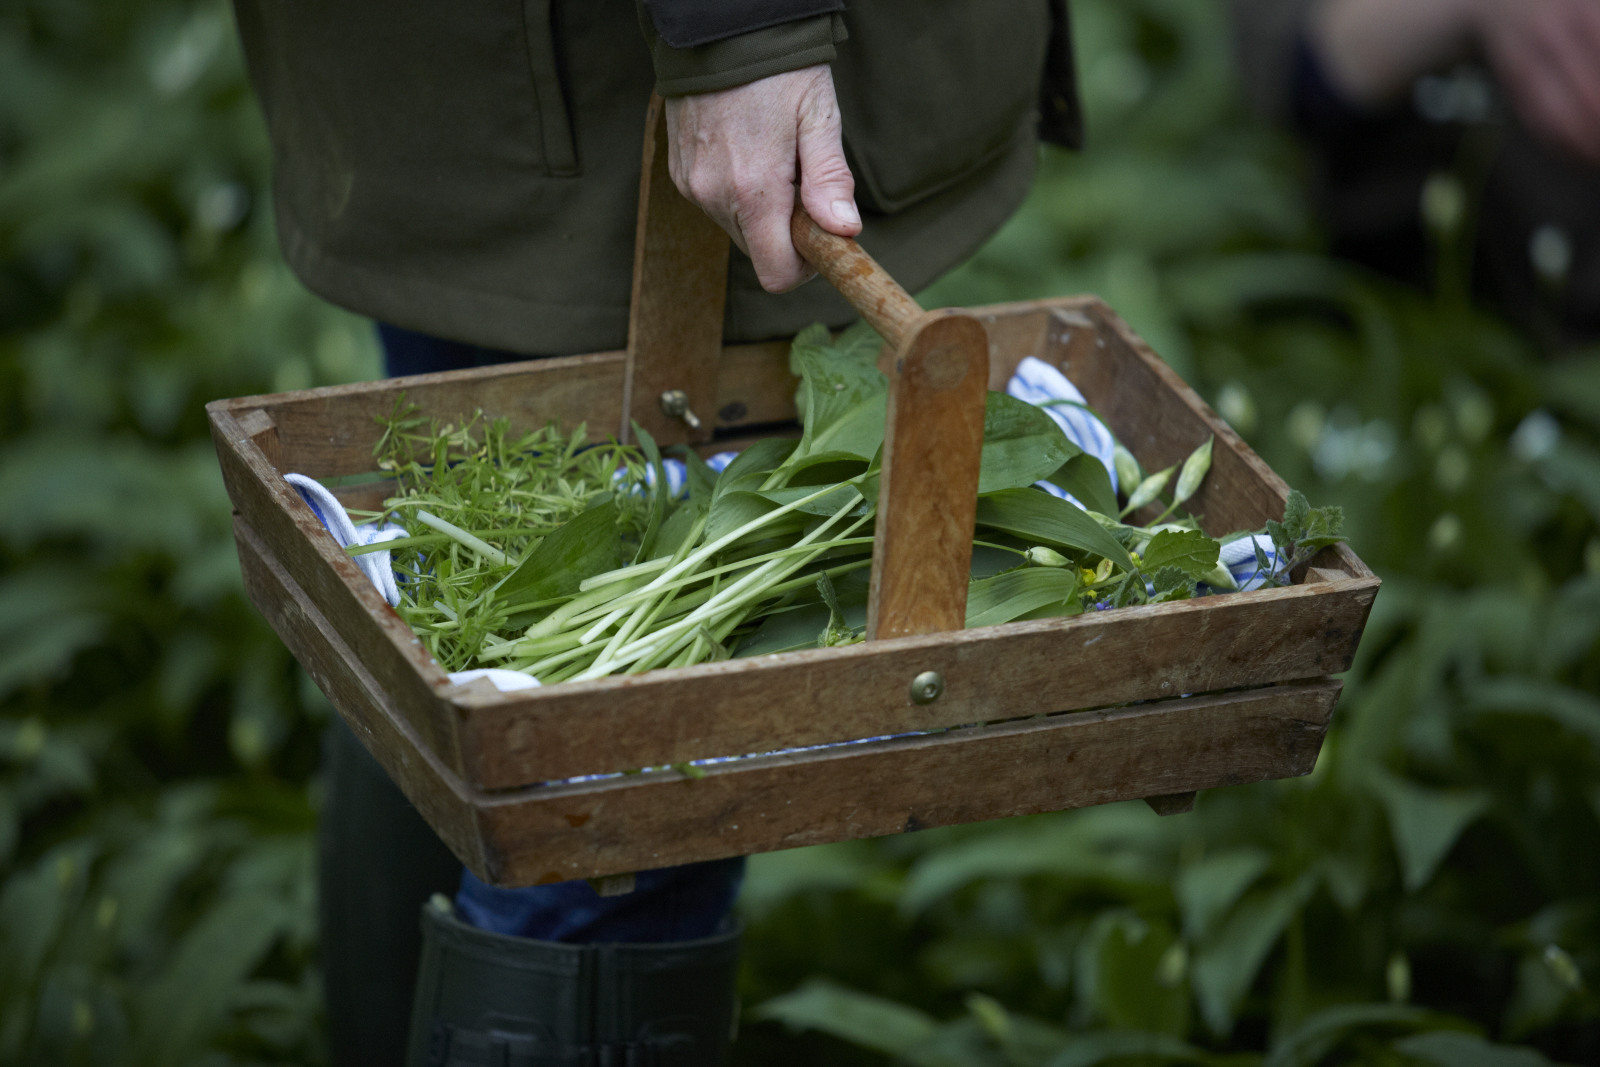 Woman standing in outdoor clothes holding plant trug filled with foraged foods such as fennel and wild garlic